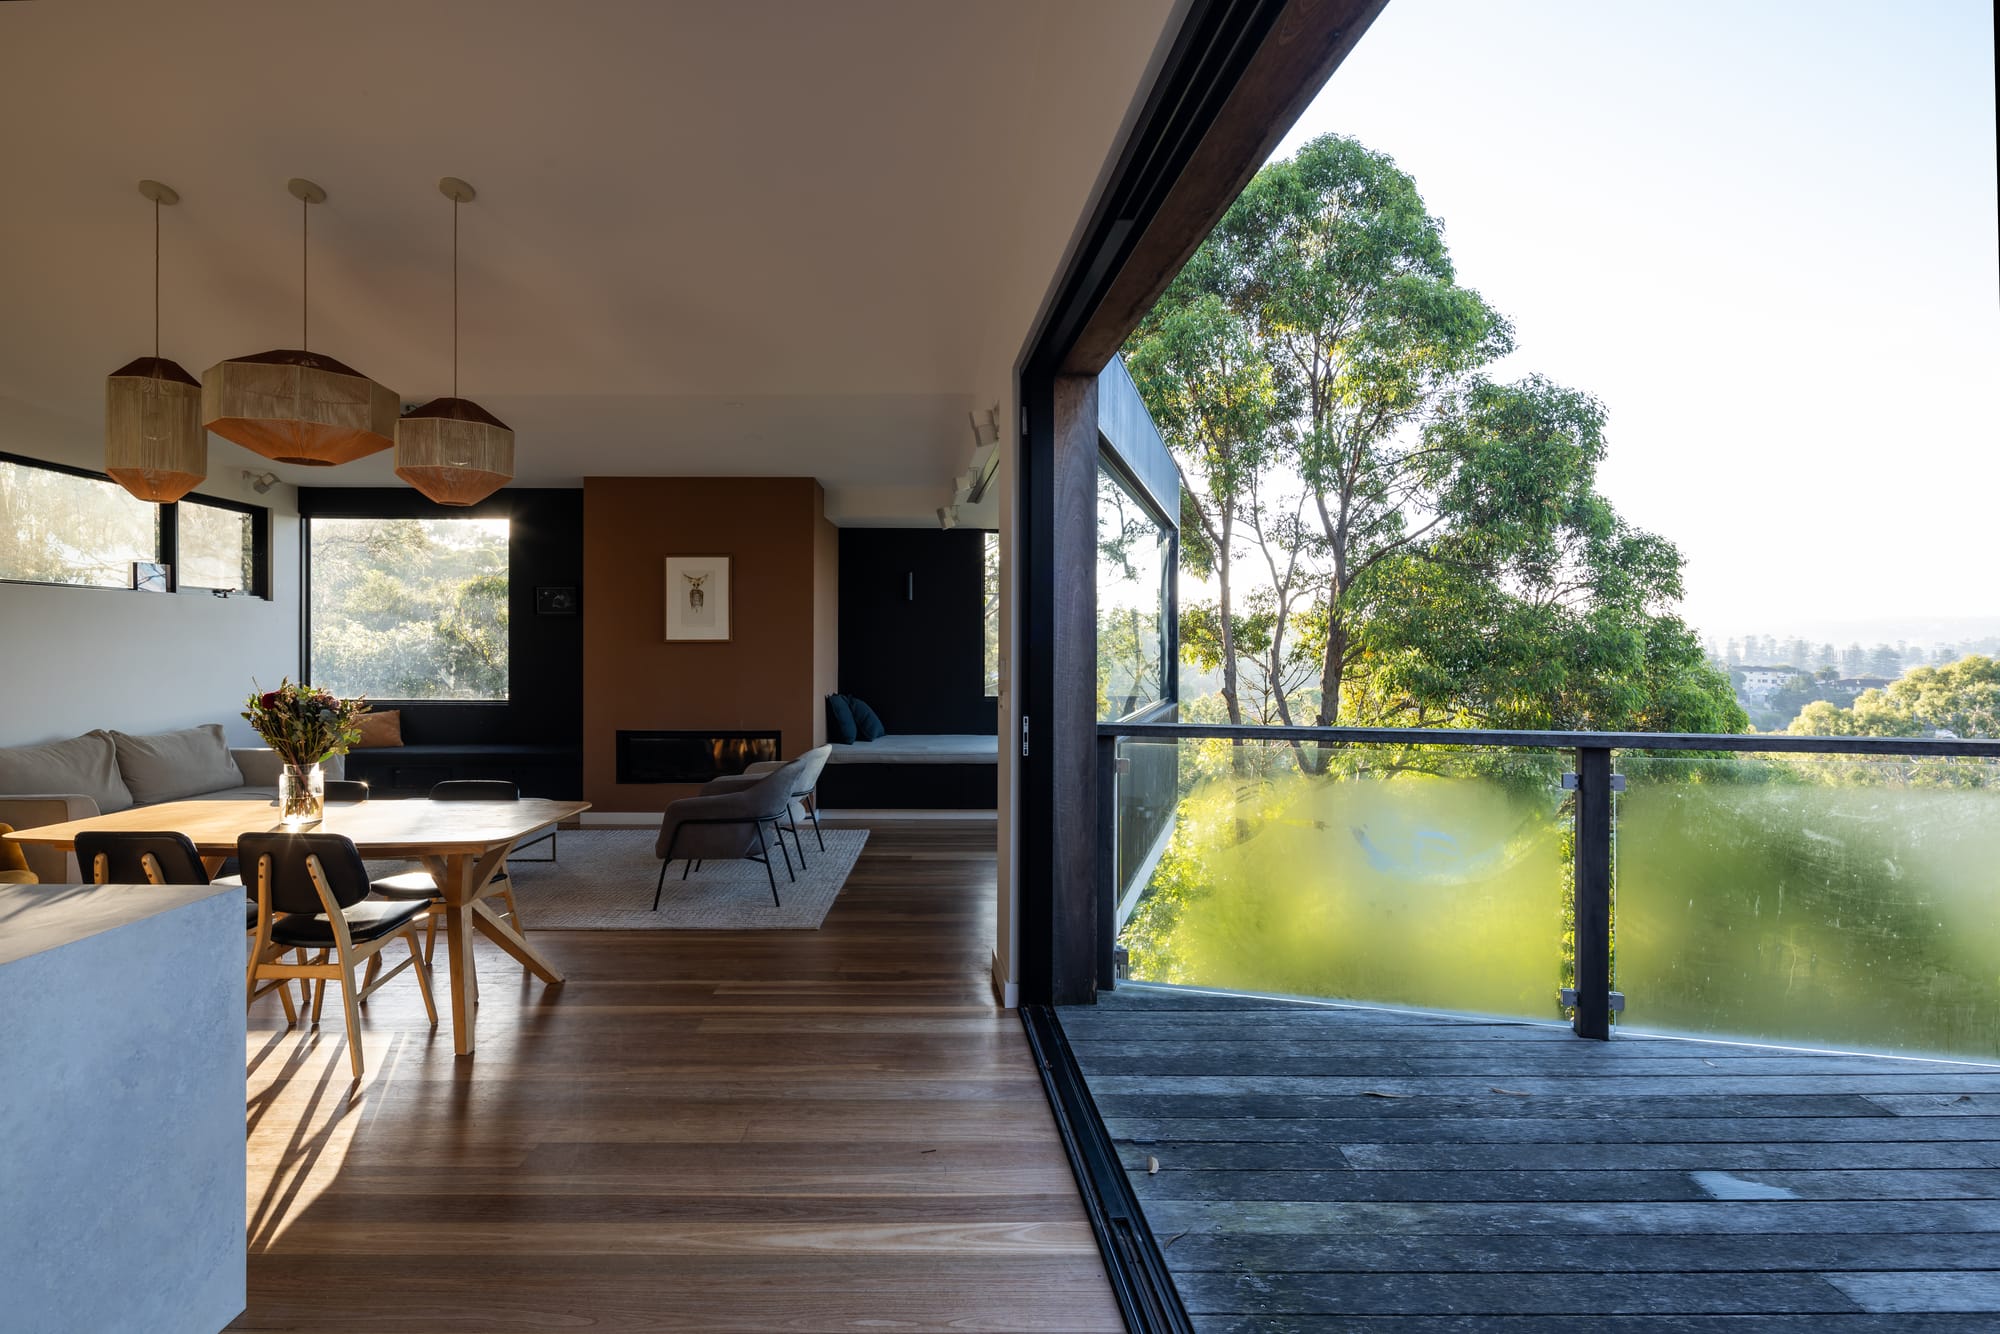 Tree House by North By North. Photography by Simon Whitbread. Open plan kitchen, living dining space extending onto timber deck. Glass fencing on deck overlooking green views. 